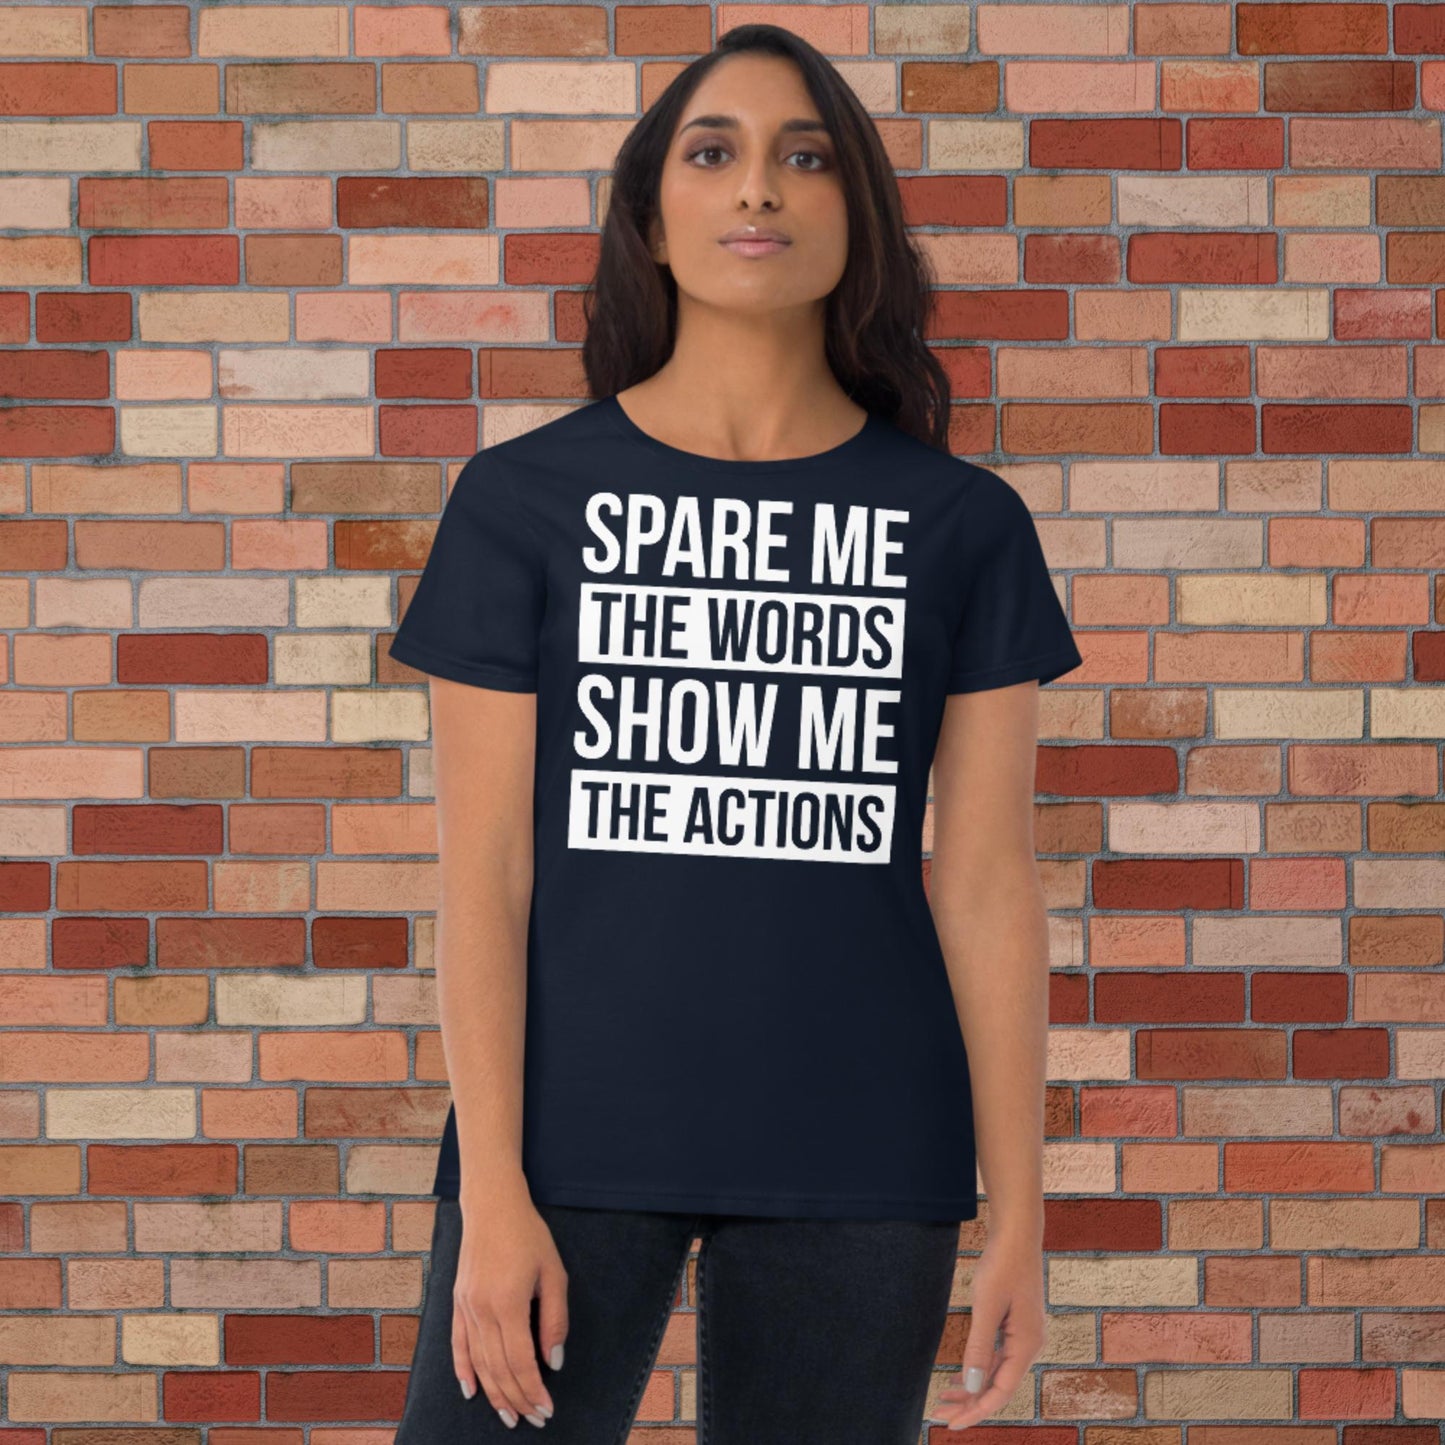 Women's Fitted Spare Words Show Action Tee